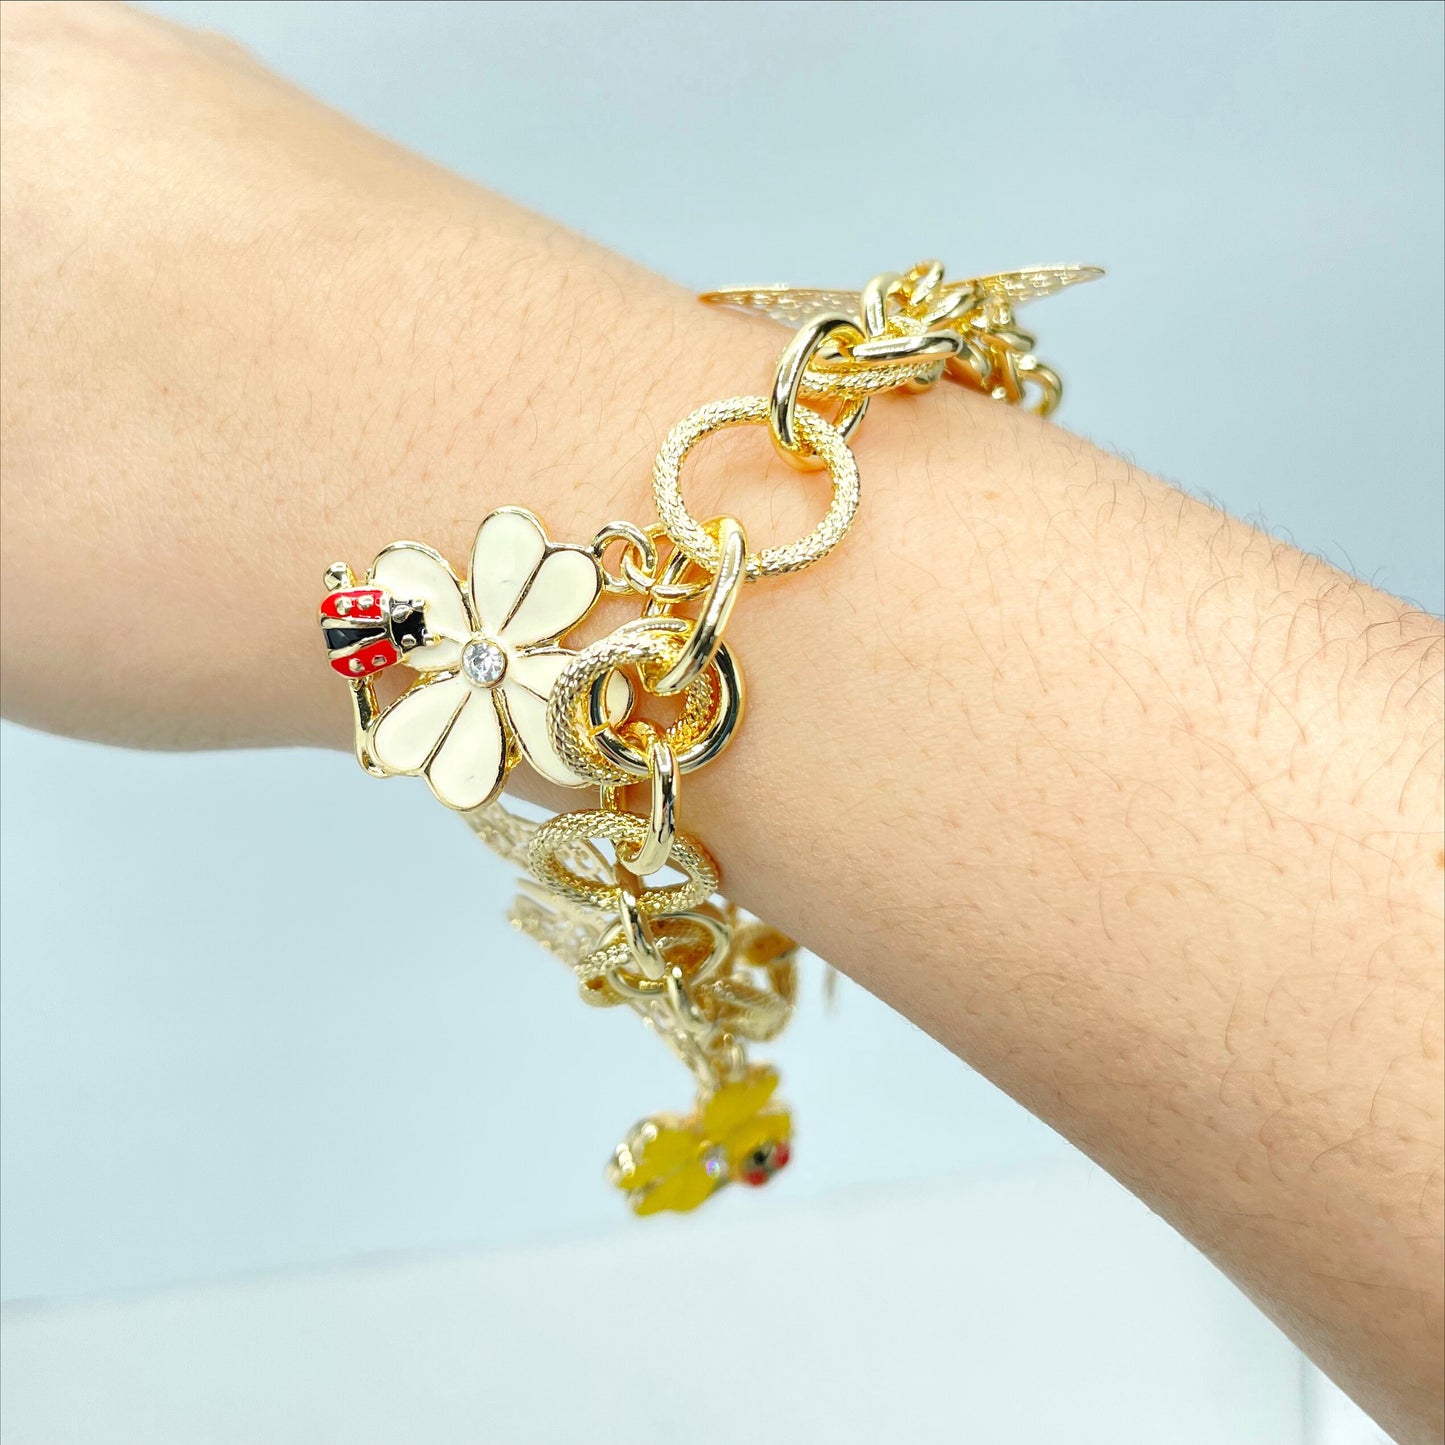 18k Gold Filled Colored Enamel Flowers and Ladybugs Charms, CZ & Butterflies in Texturized Link Bracelet, Wholesale Jewelry Making Supplies